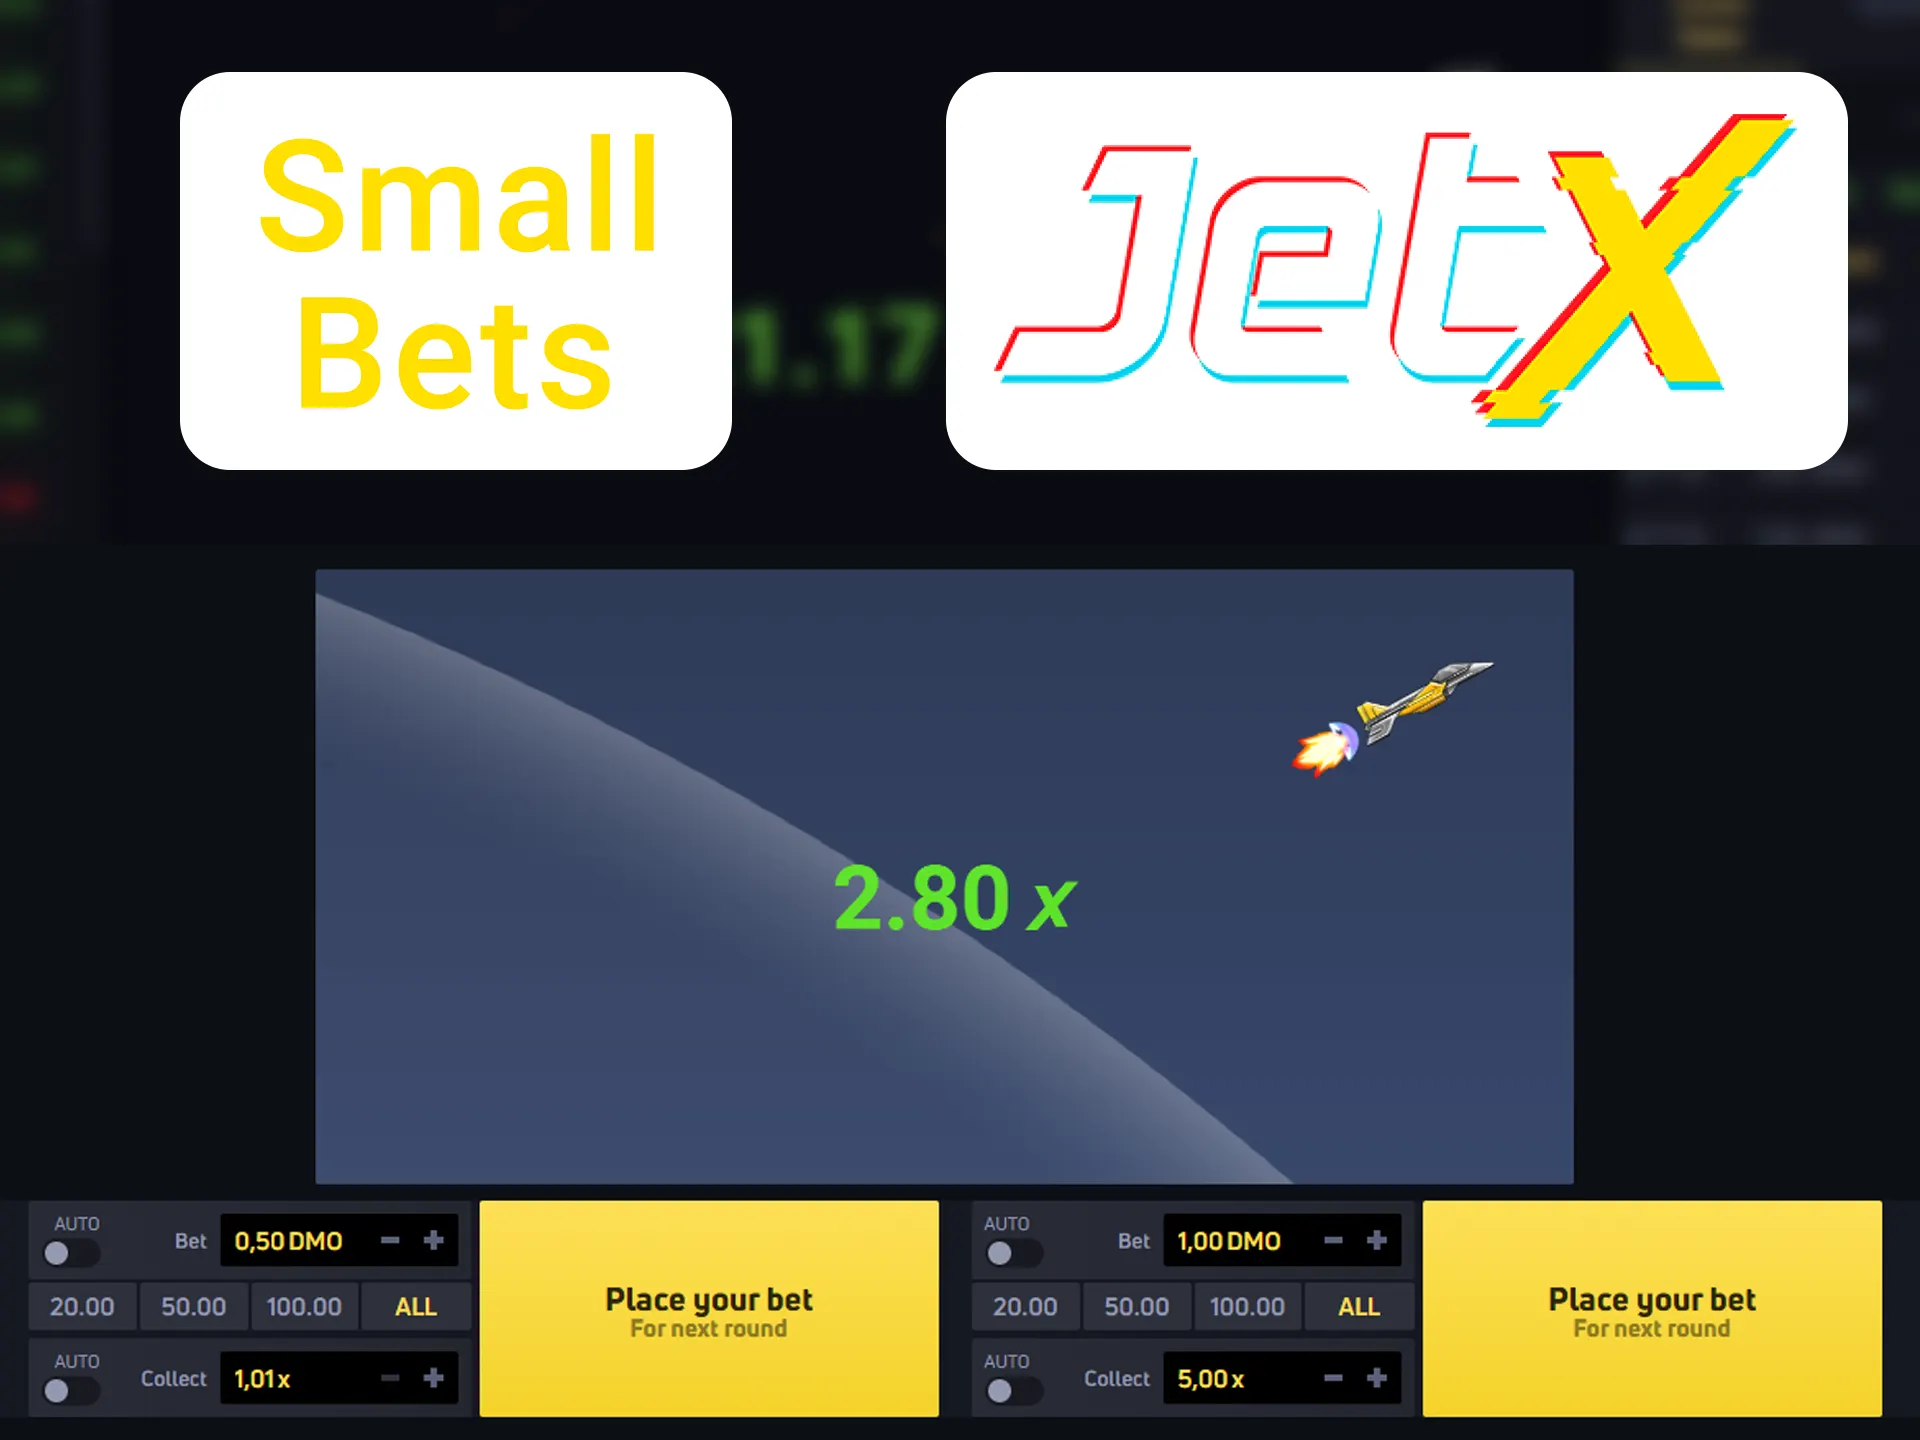 Make small bets in the JetX game and win a lot of money.